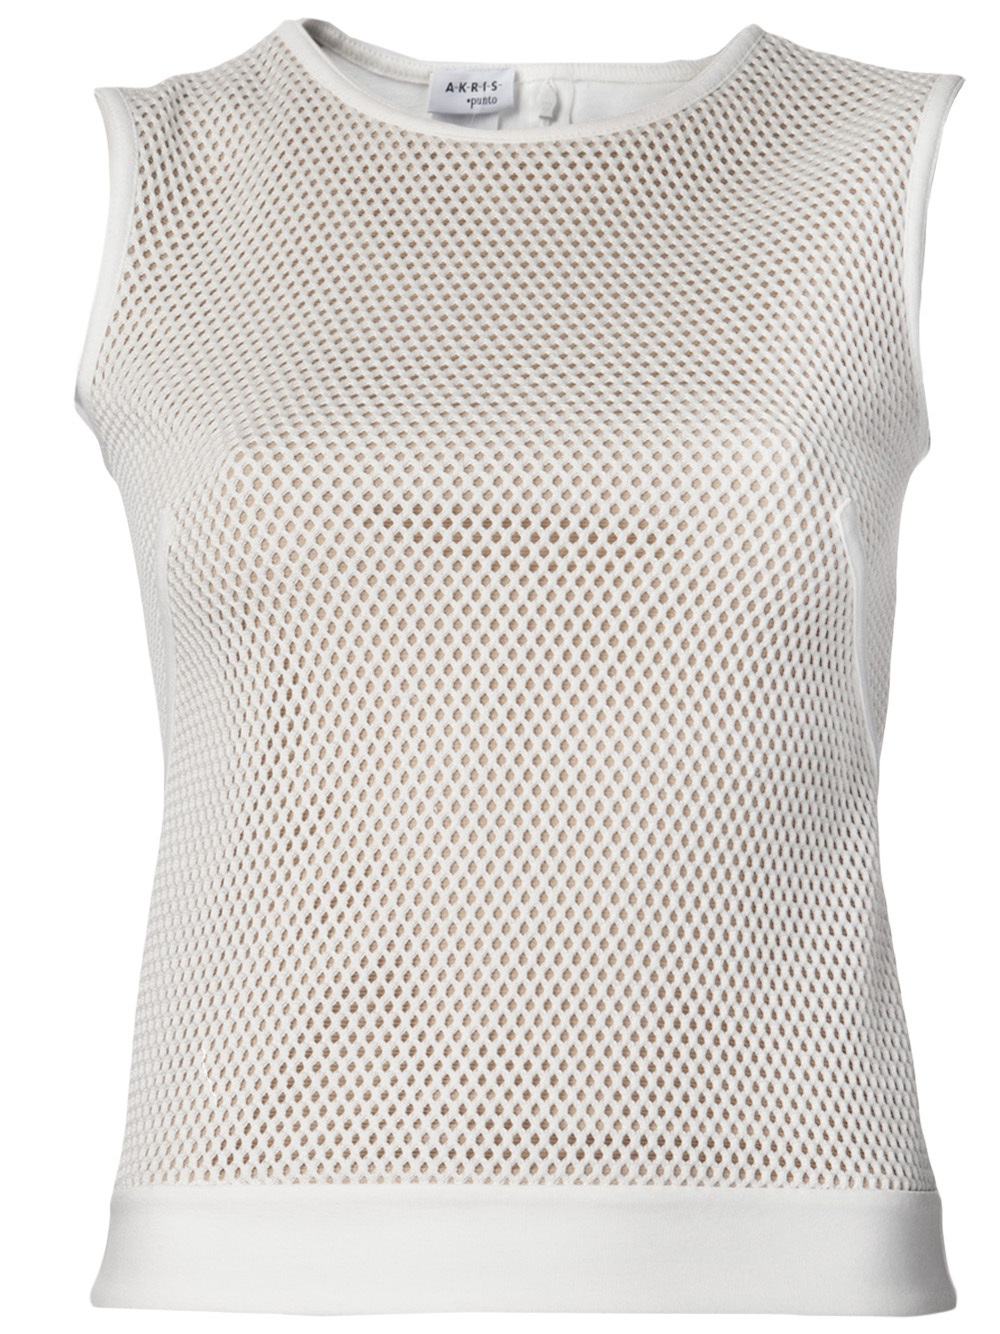 Akris Punto Mesh Front Jersey Top in White | Lyst